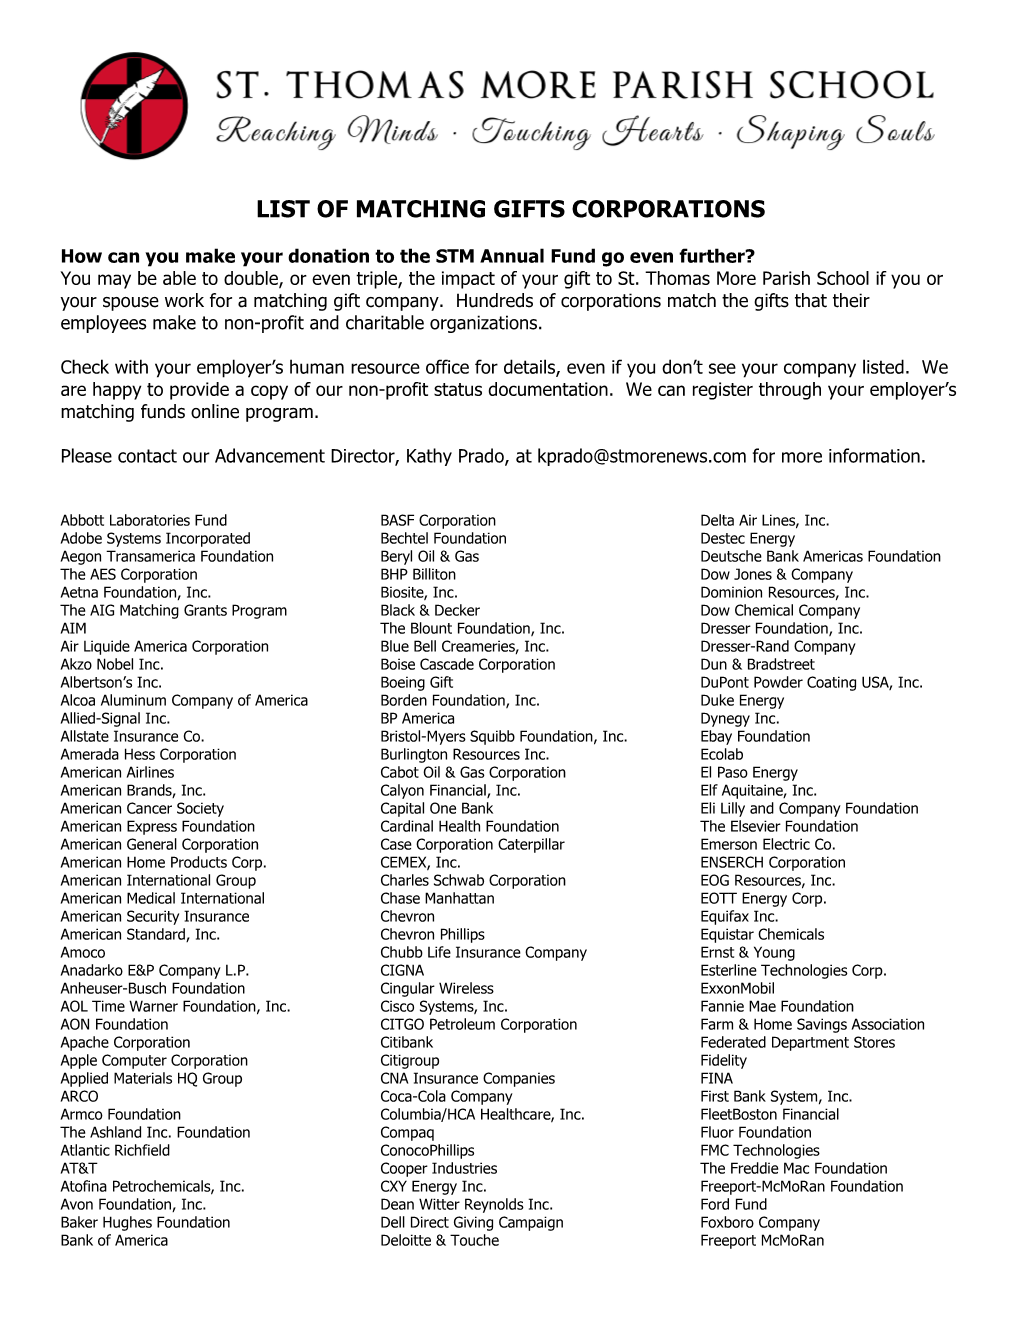 List of Matching Gifts Corporations